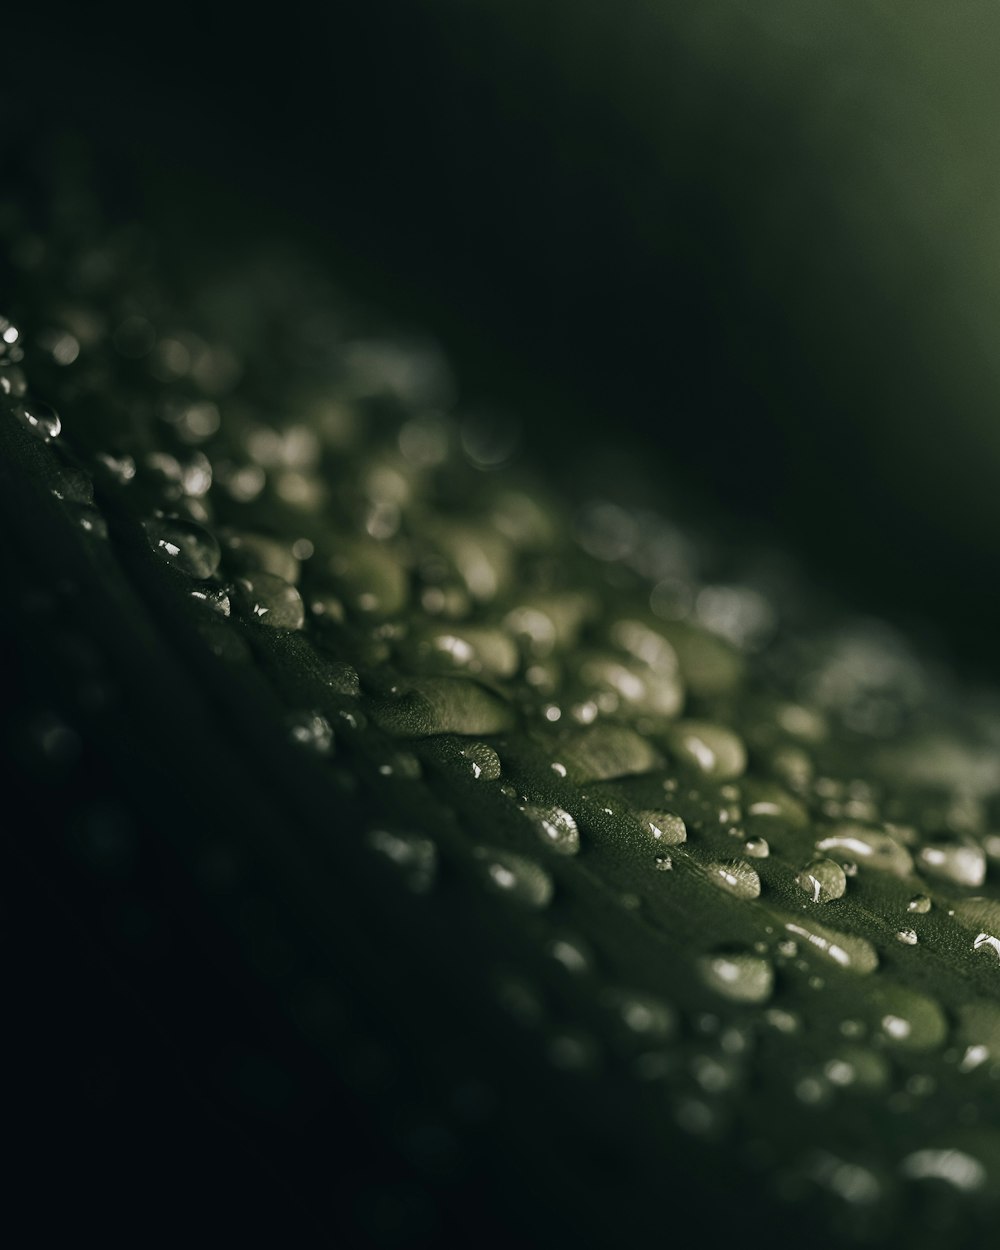 a close up of water droplets on a green surface